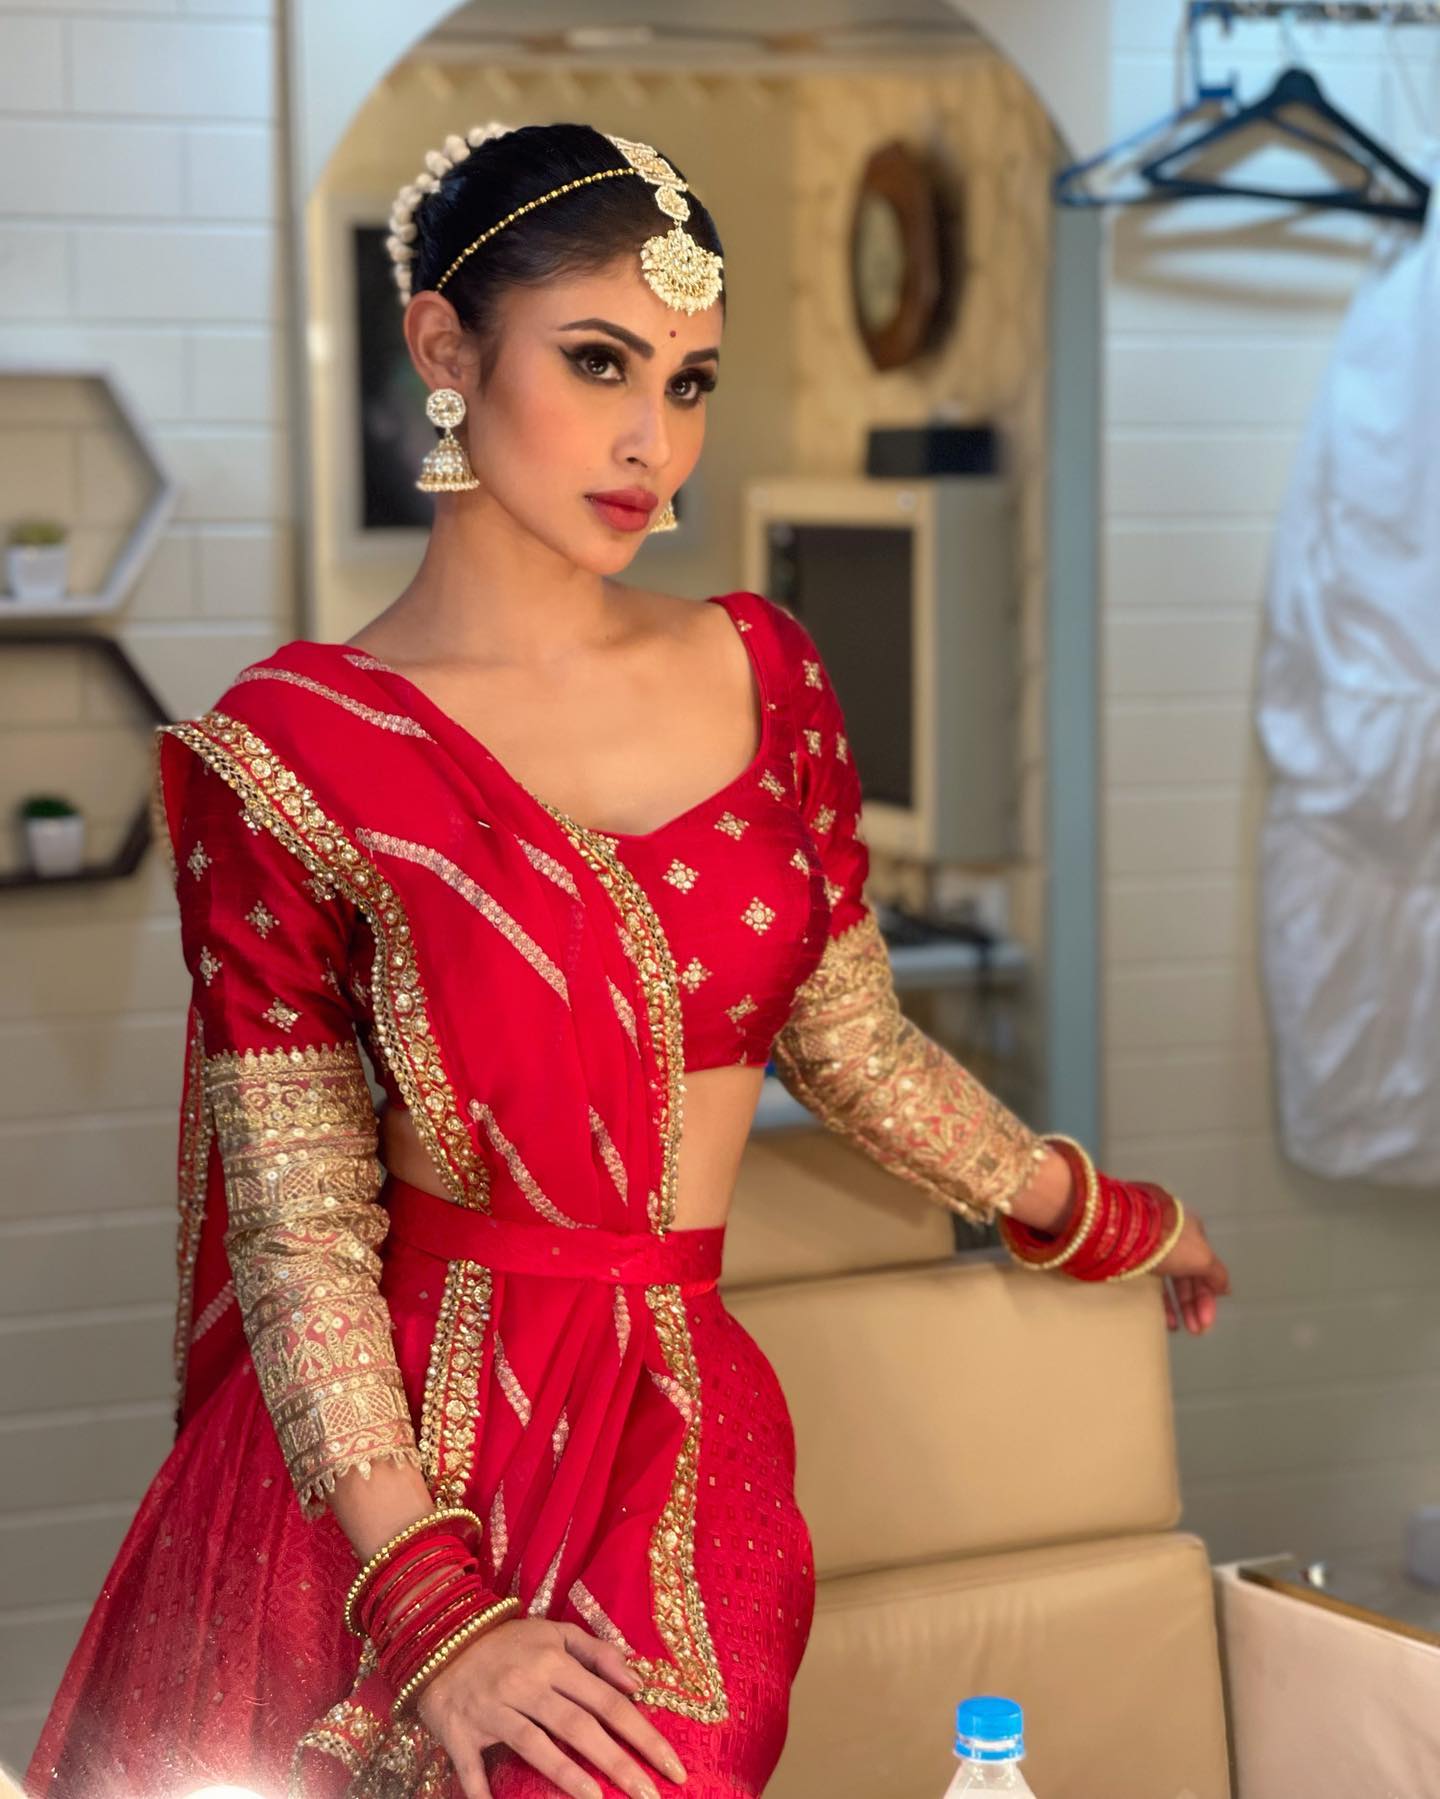 Fashion Beauties: Mouni Roy turns queen in red, Hina Khan is Boss Bold Babe in orange shirt and pencil skirt | IWMBuzz